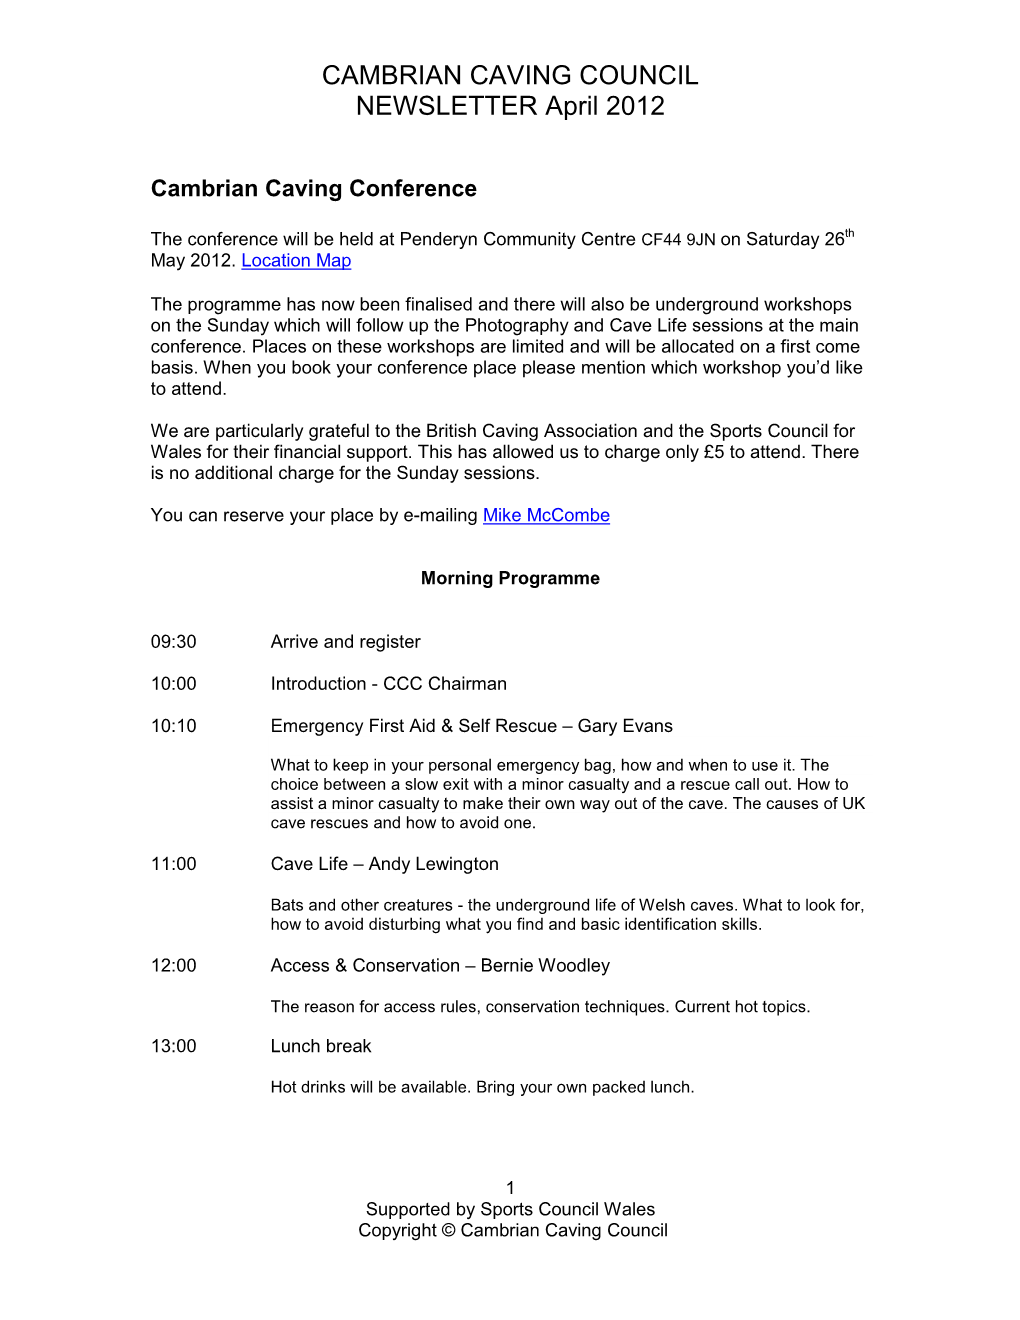 CAMBRIAN CAVING COUNCIL NEWSLETTER April 2012